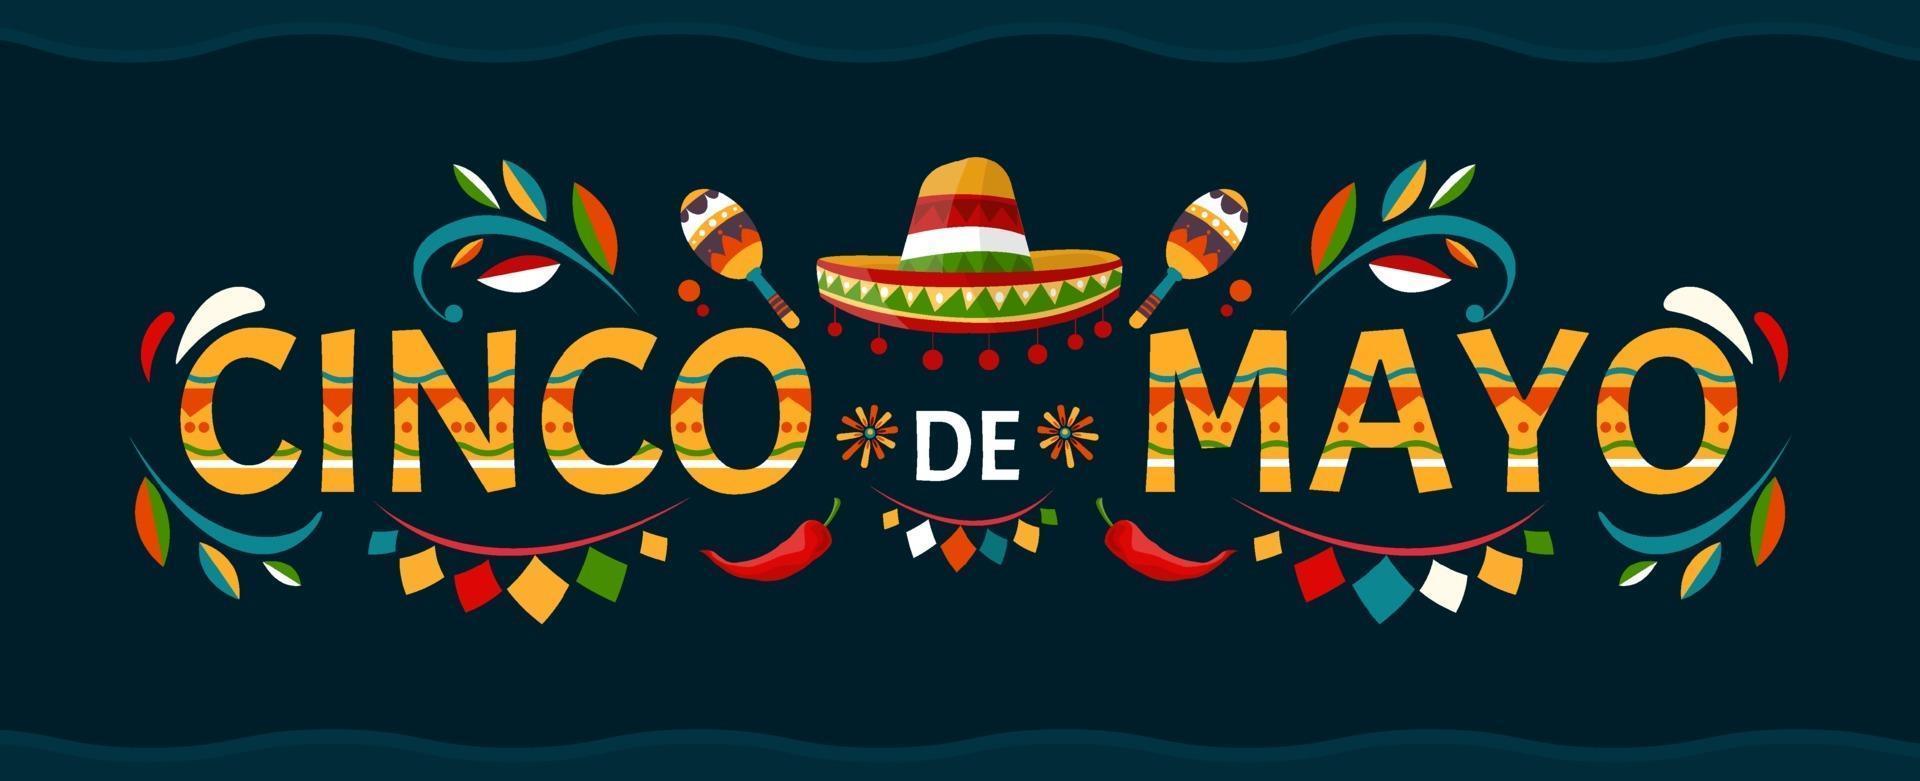 cinco-de-mayo-may-5-holiday-in-mexico-poster-with-grunge-texture-chili-peppers-and-sombrero-cartoon- image